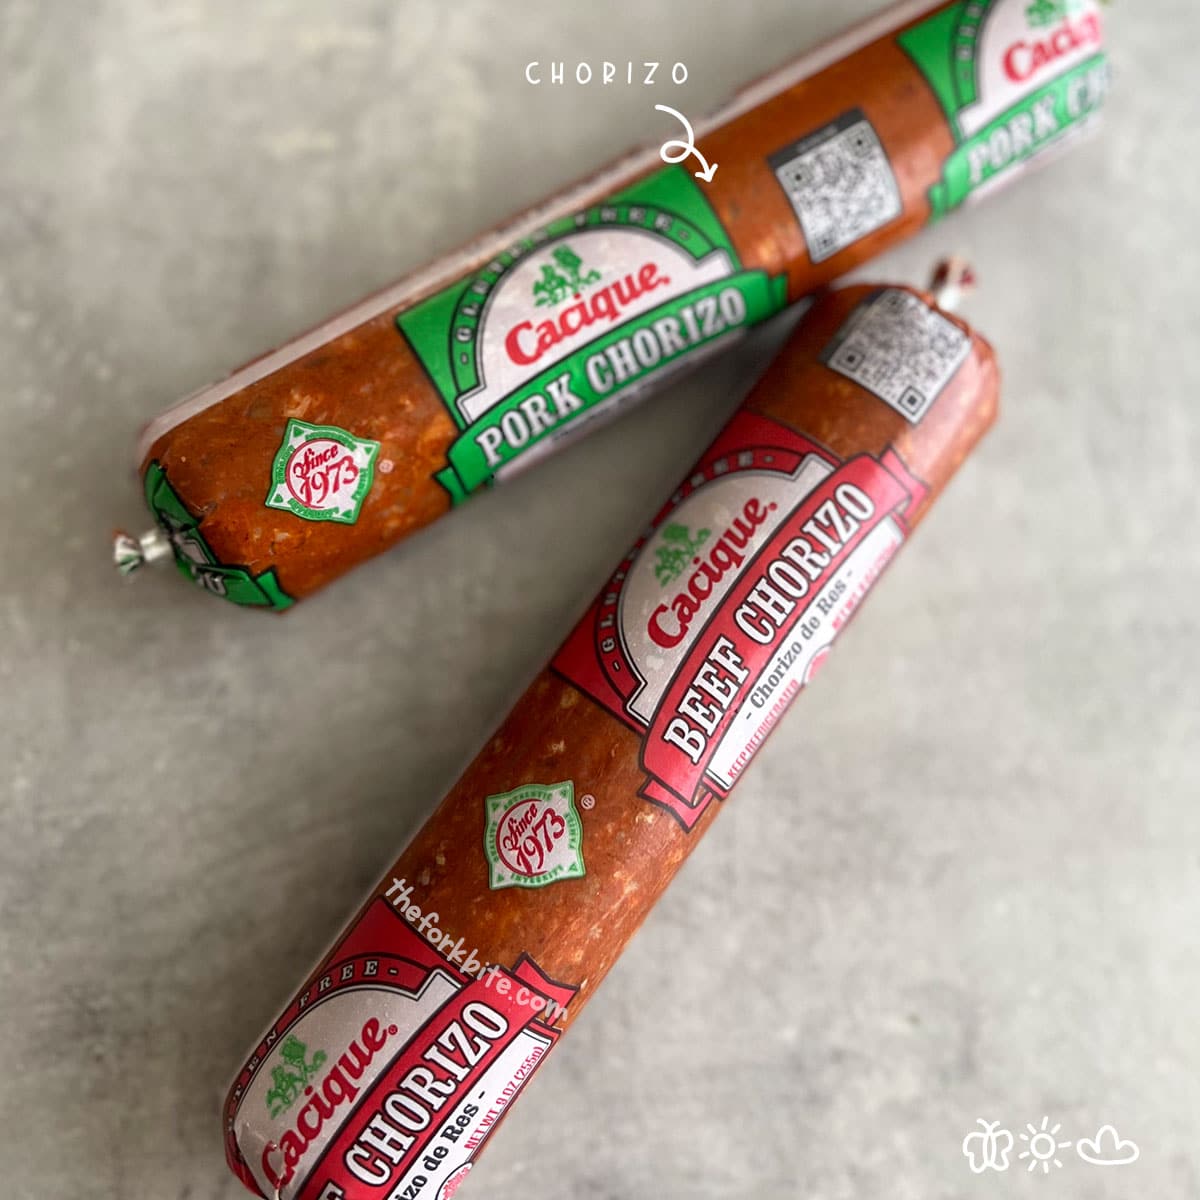 Is Chorizo Made from Lymph Nodes? Chorizo is the perfect ingredient to add a little heat. With different types of chorizo, which one is better